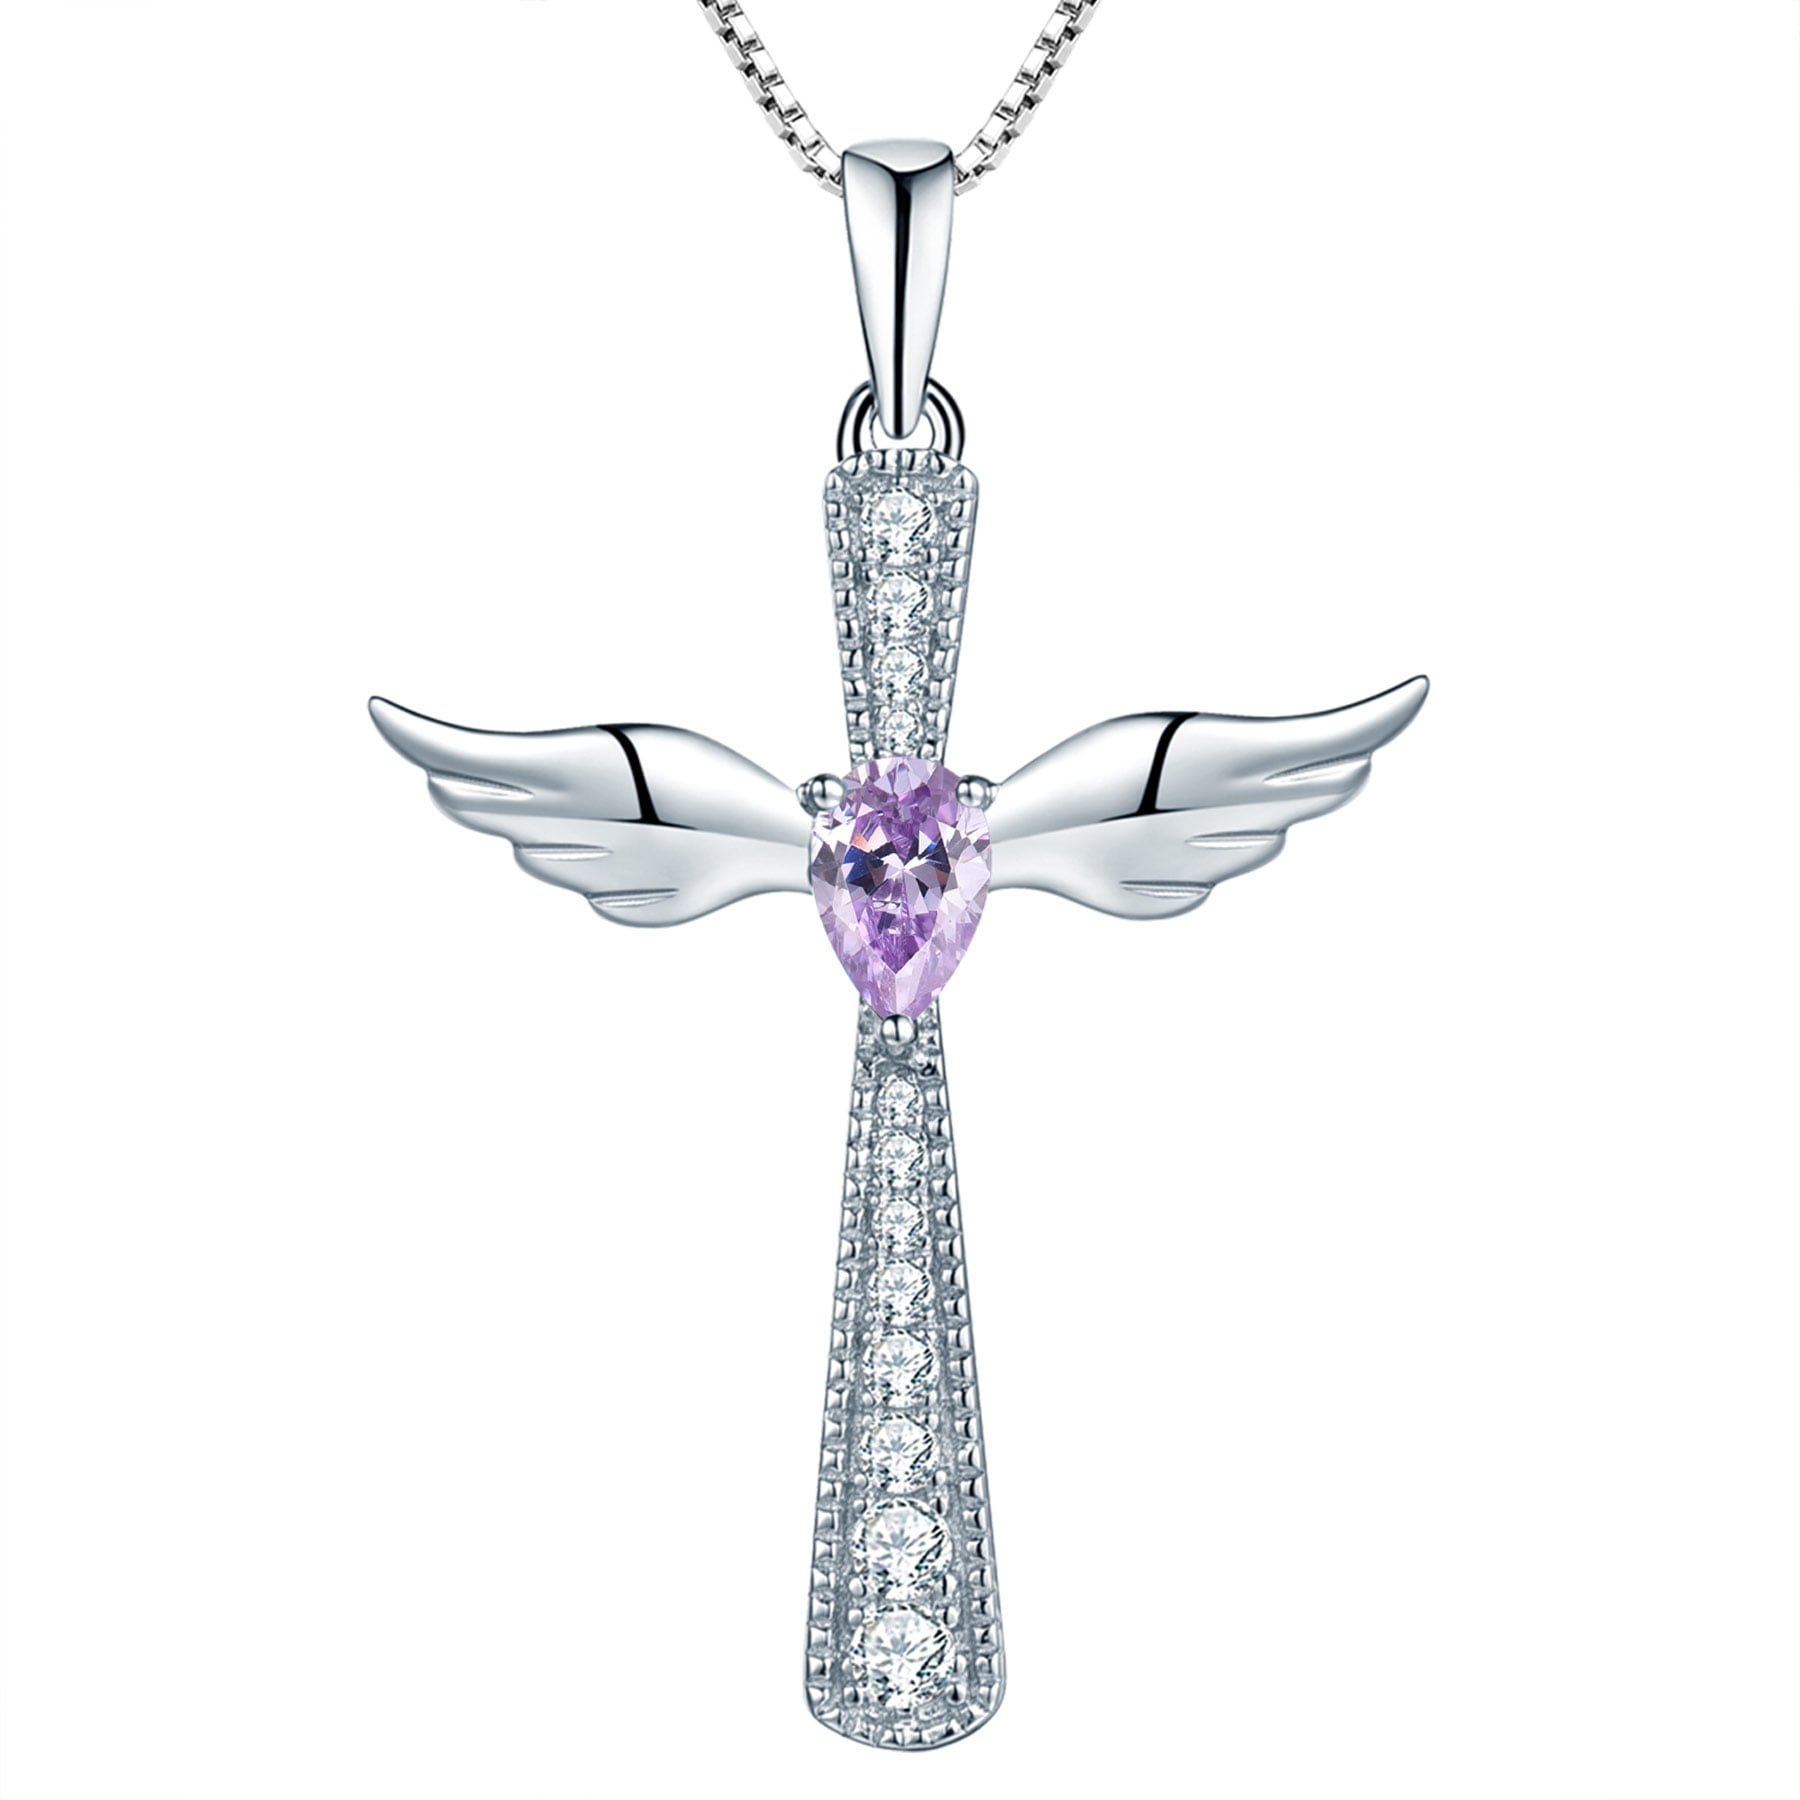 Children Women Flying Guardian Angel Cubic Zirconia Pendant with Chain Silver 925 